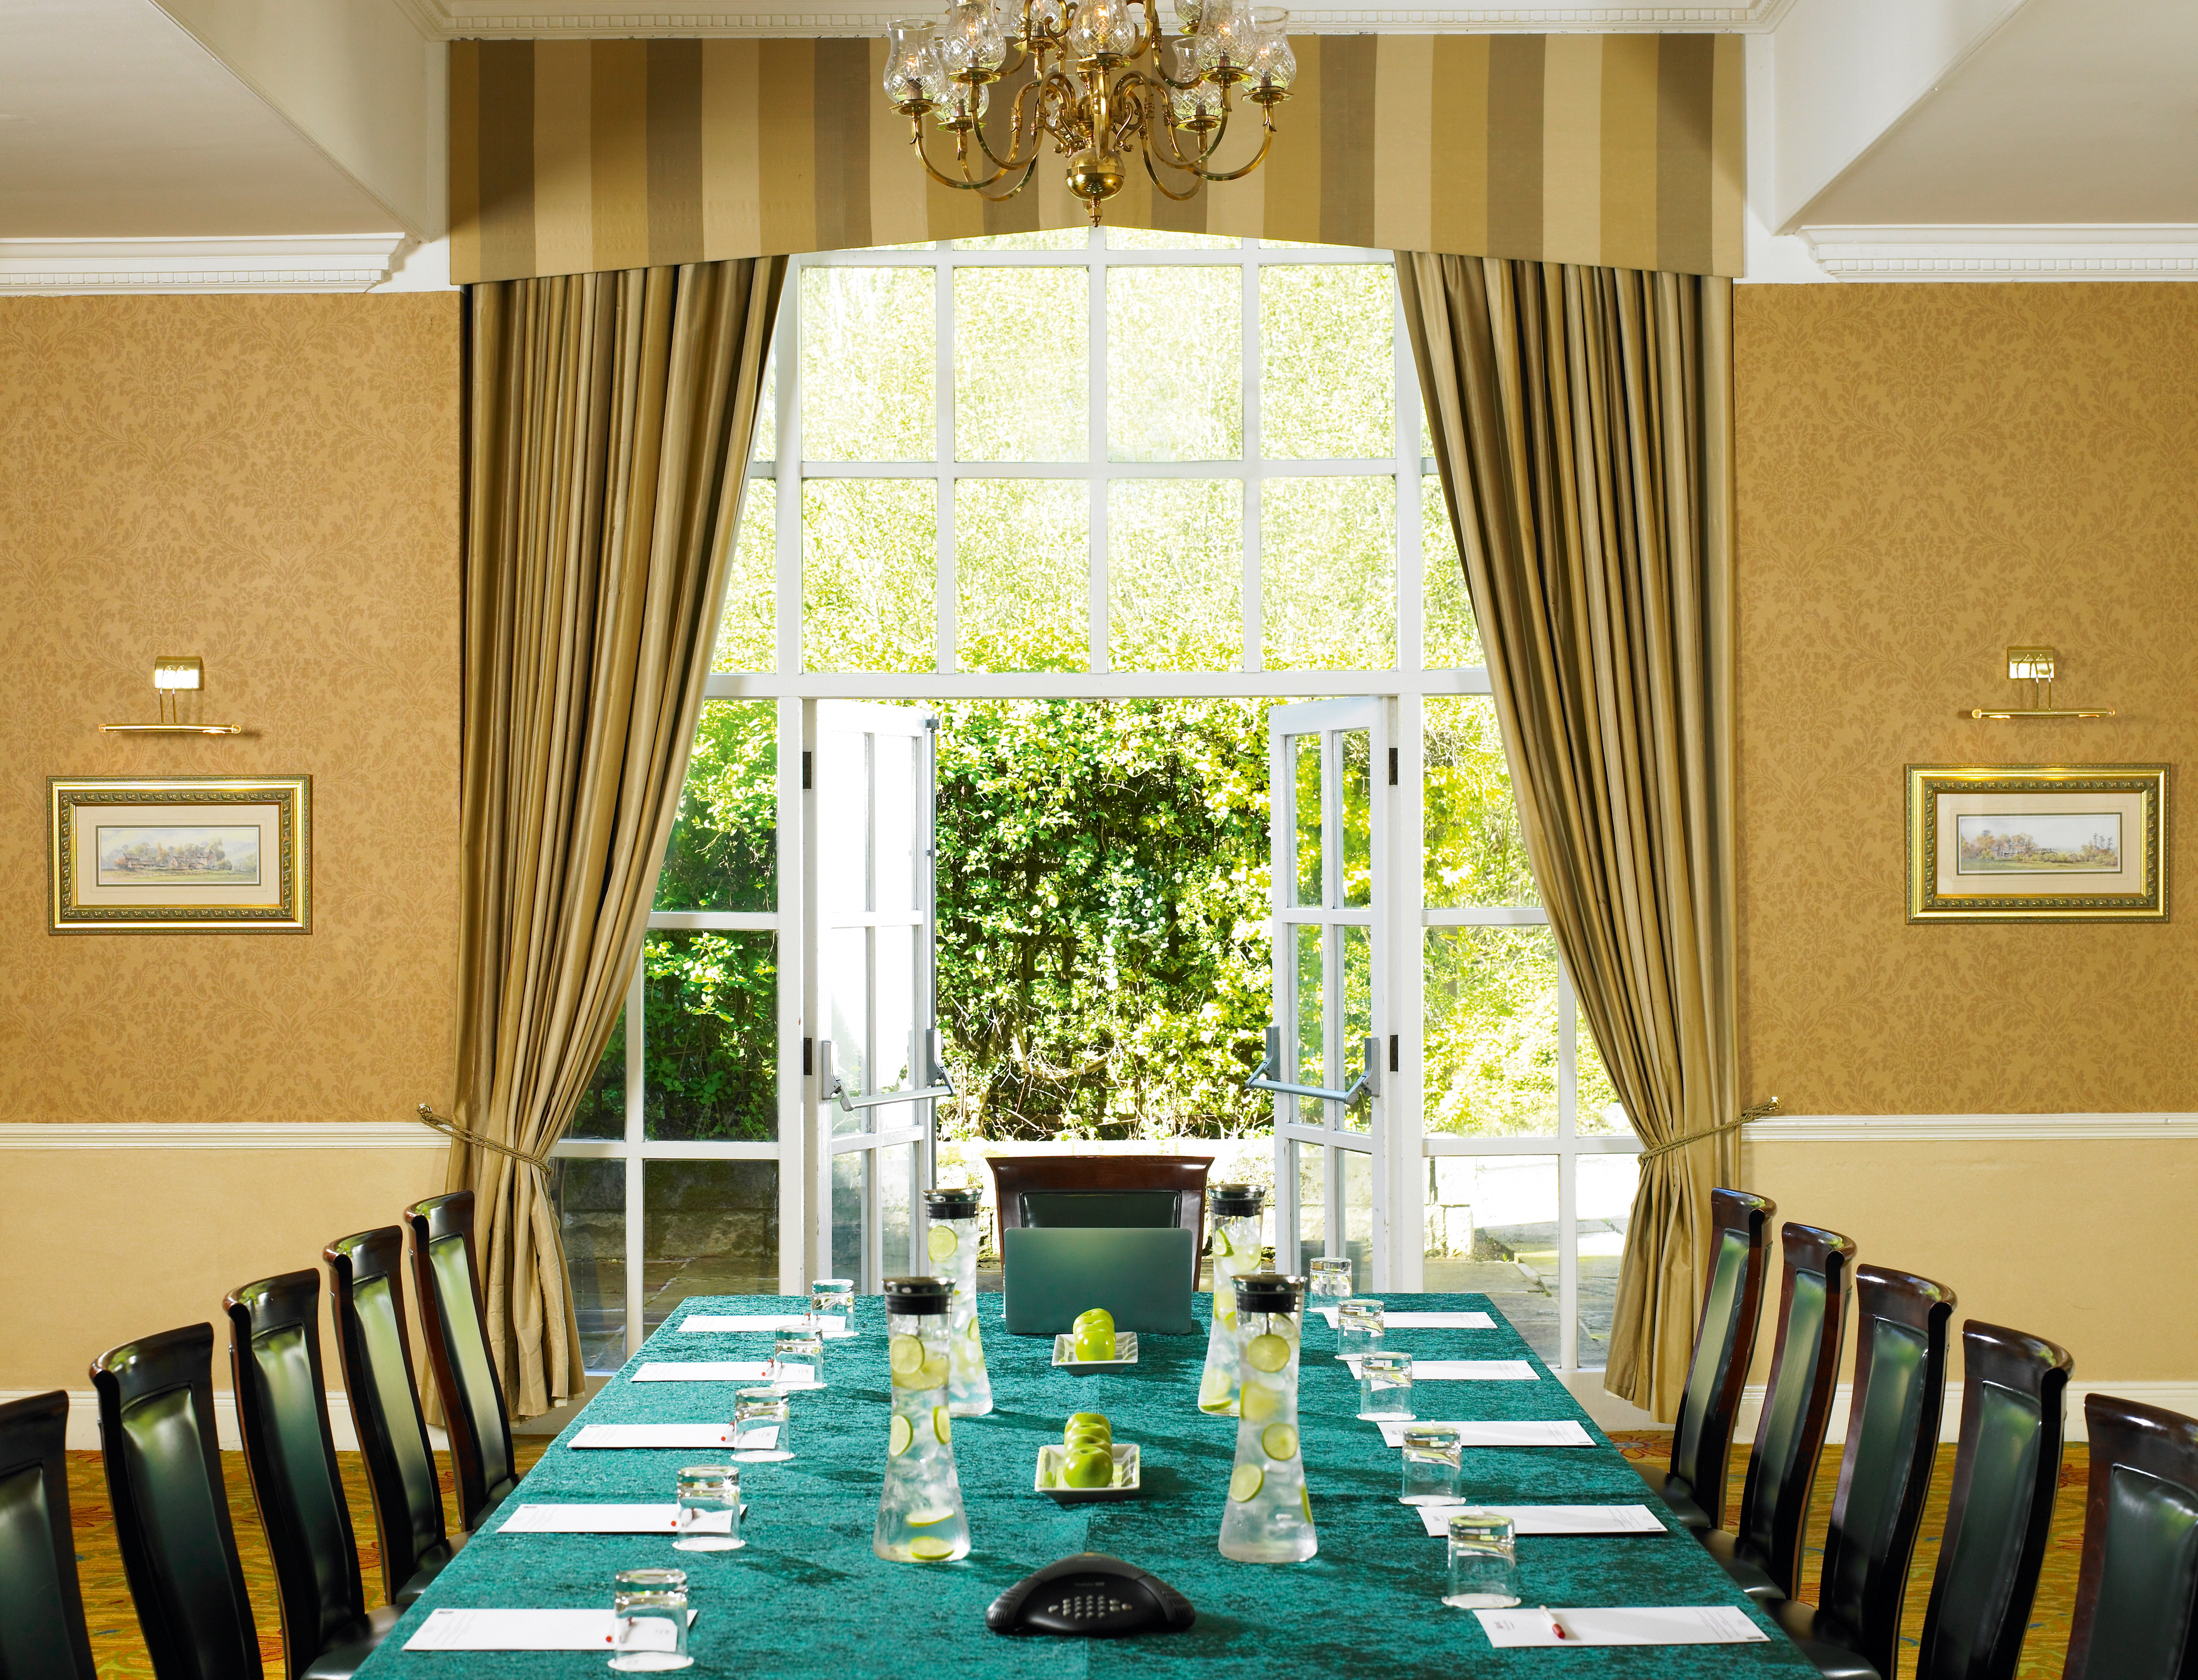 Hire Hollins Hall Hotel & Country Club | Burley | VenueScanner